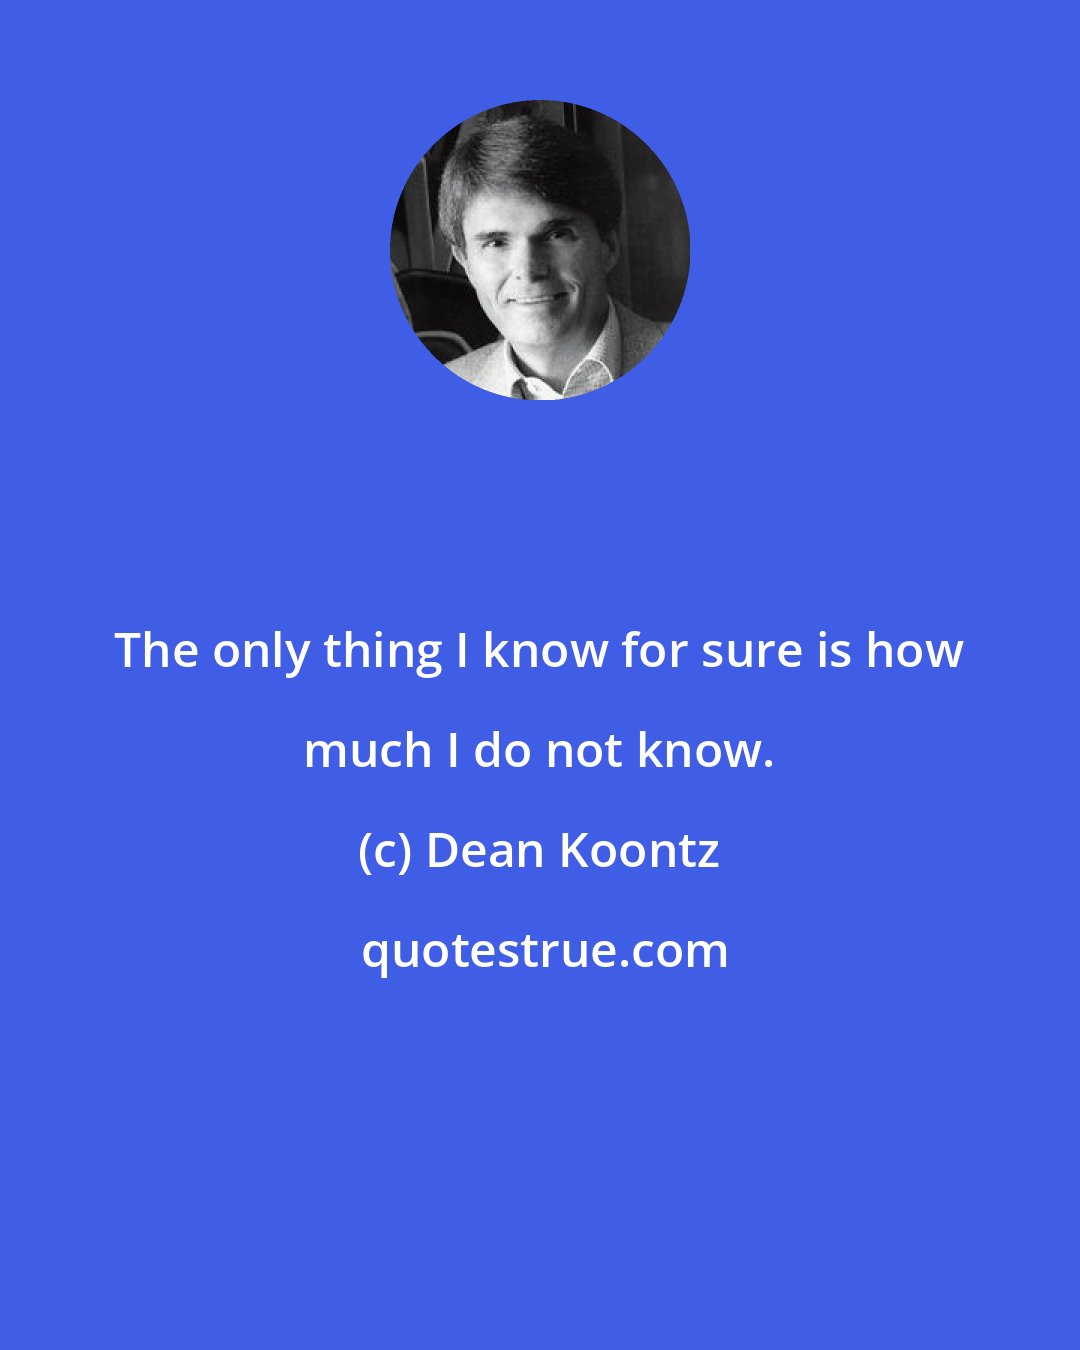 Dean Koontz: The only thing I know for sure is how much I do not know.